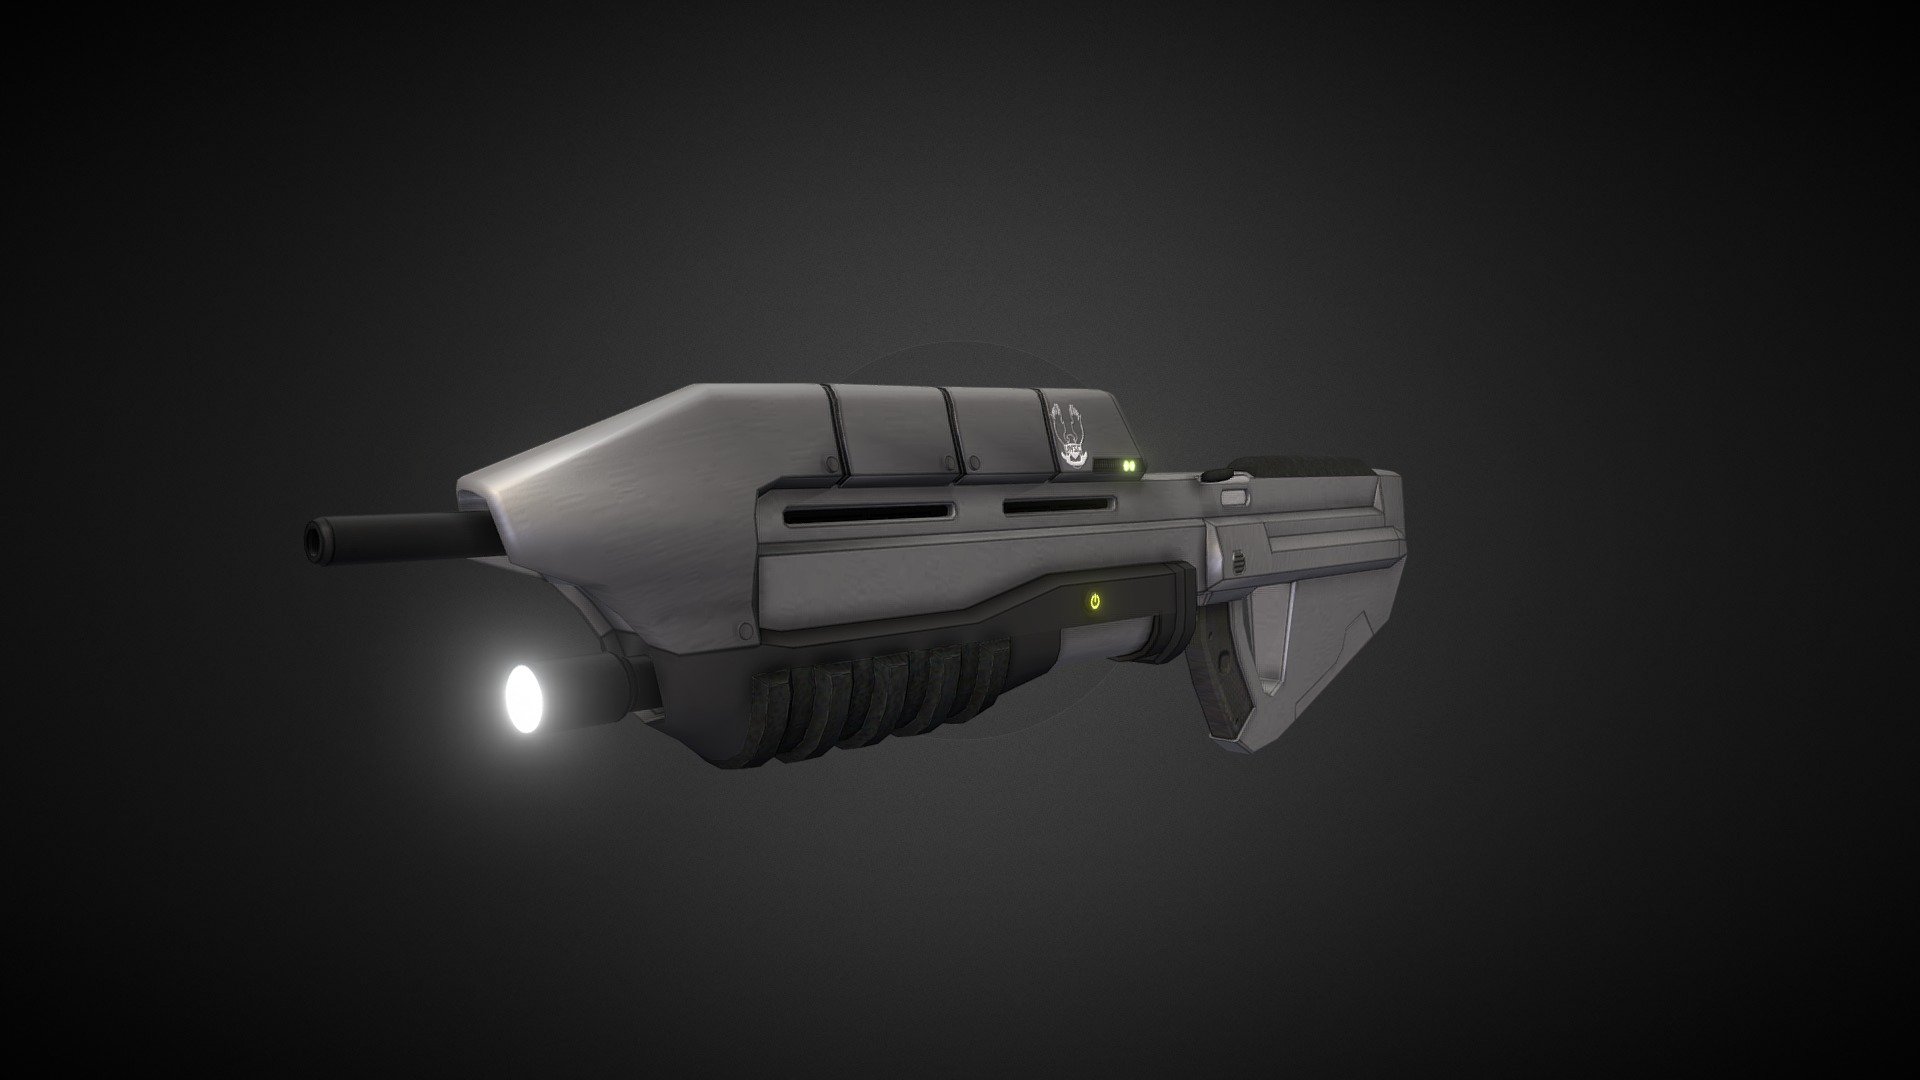 Halo Assault Rifle made by Diego Fernández Delgado (Gearen) - Halo Assault Rifle - 3D model by Gearen 3d model